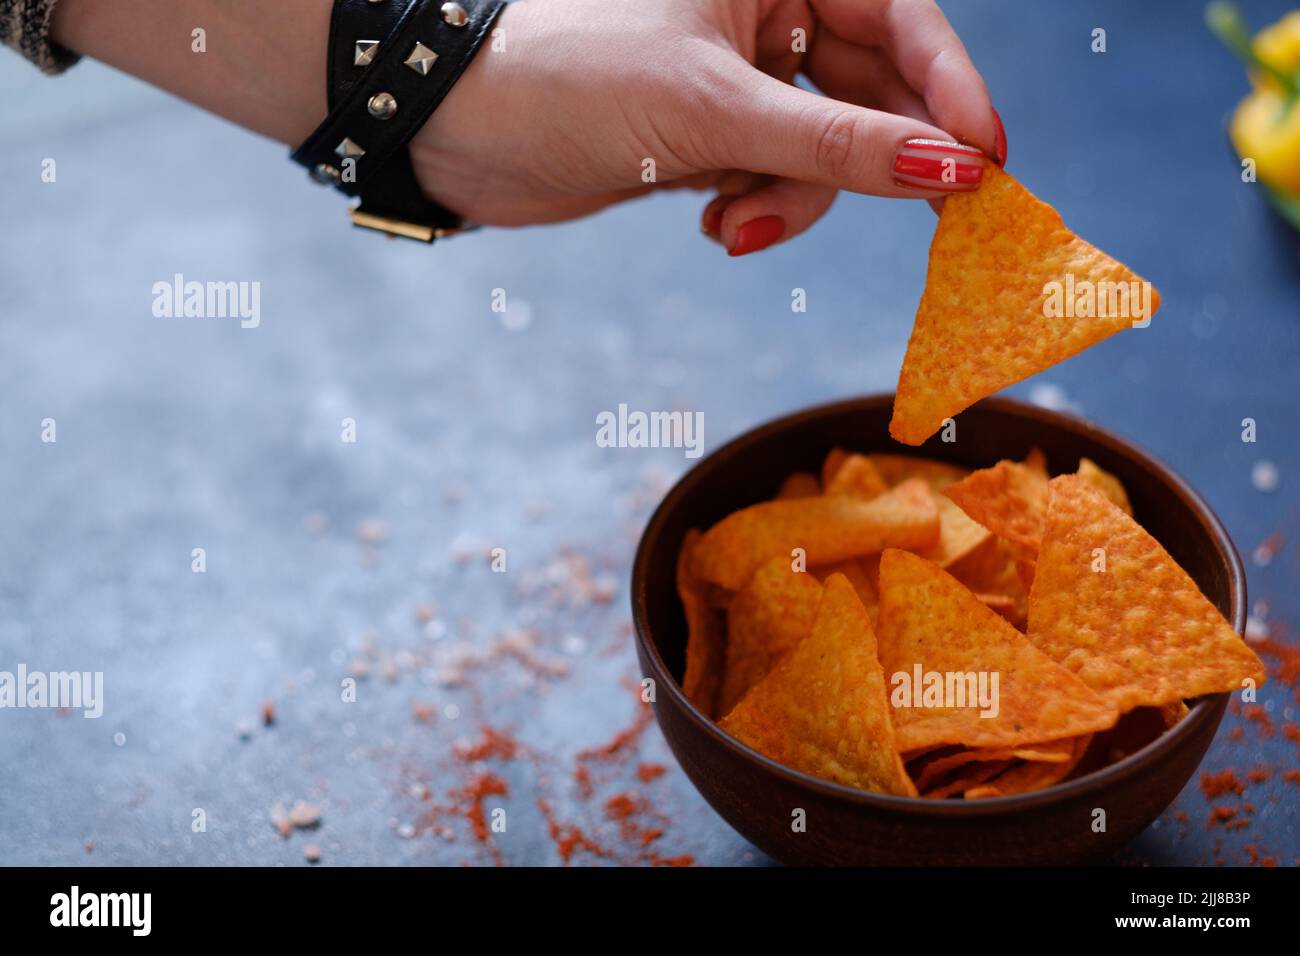 junk fast food eating nacho chips hand hold crisp Stock Photo